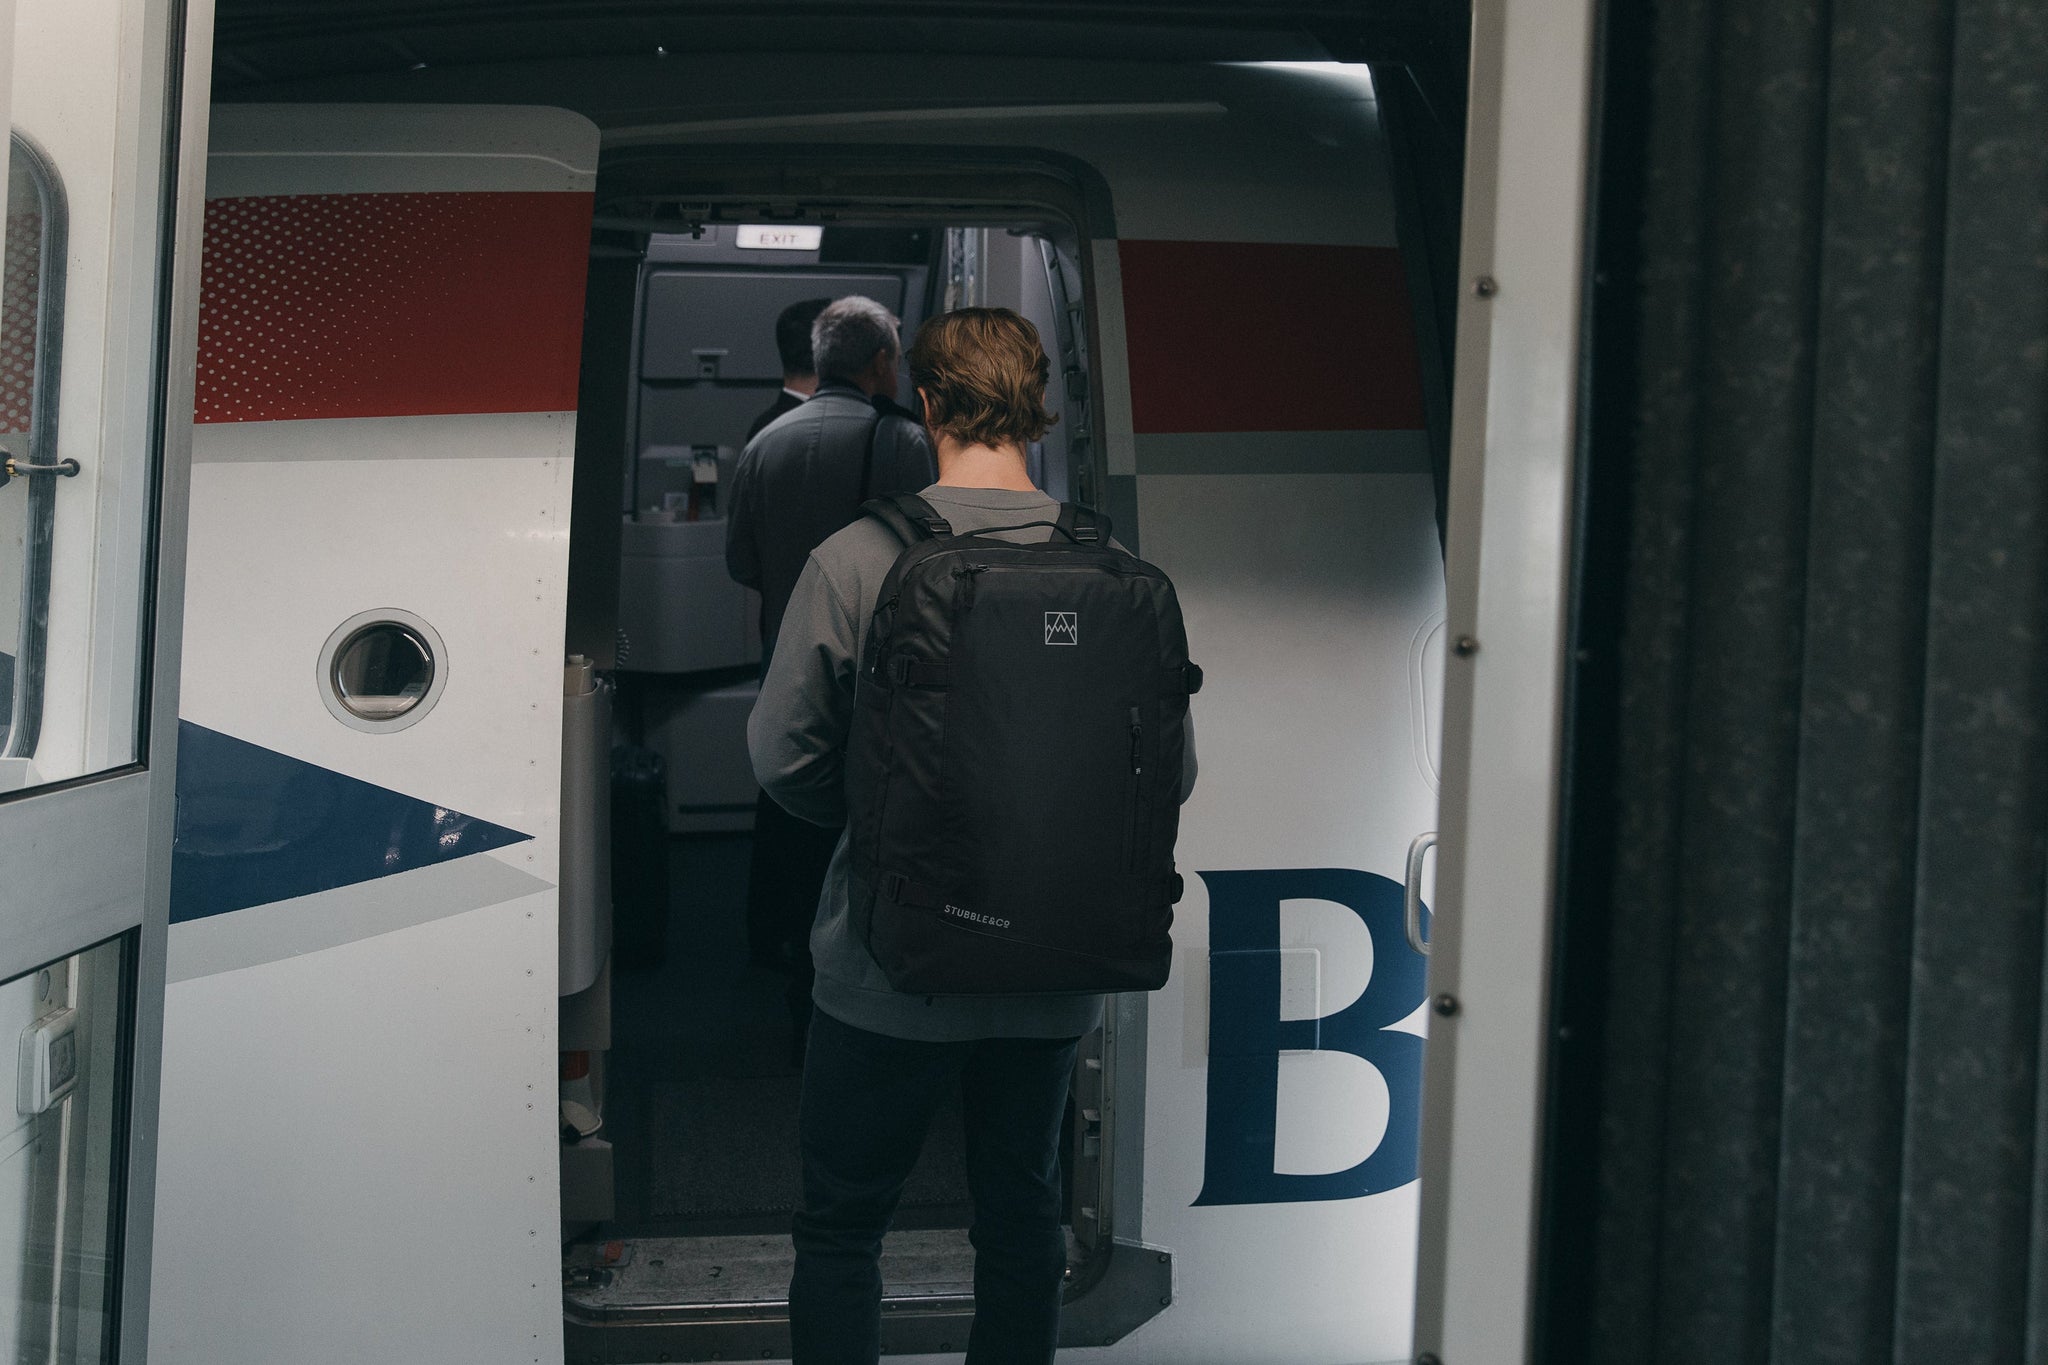 Man walking onto airplane with backpack